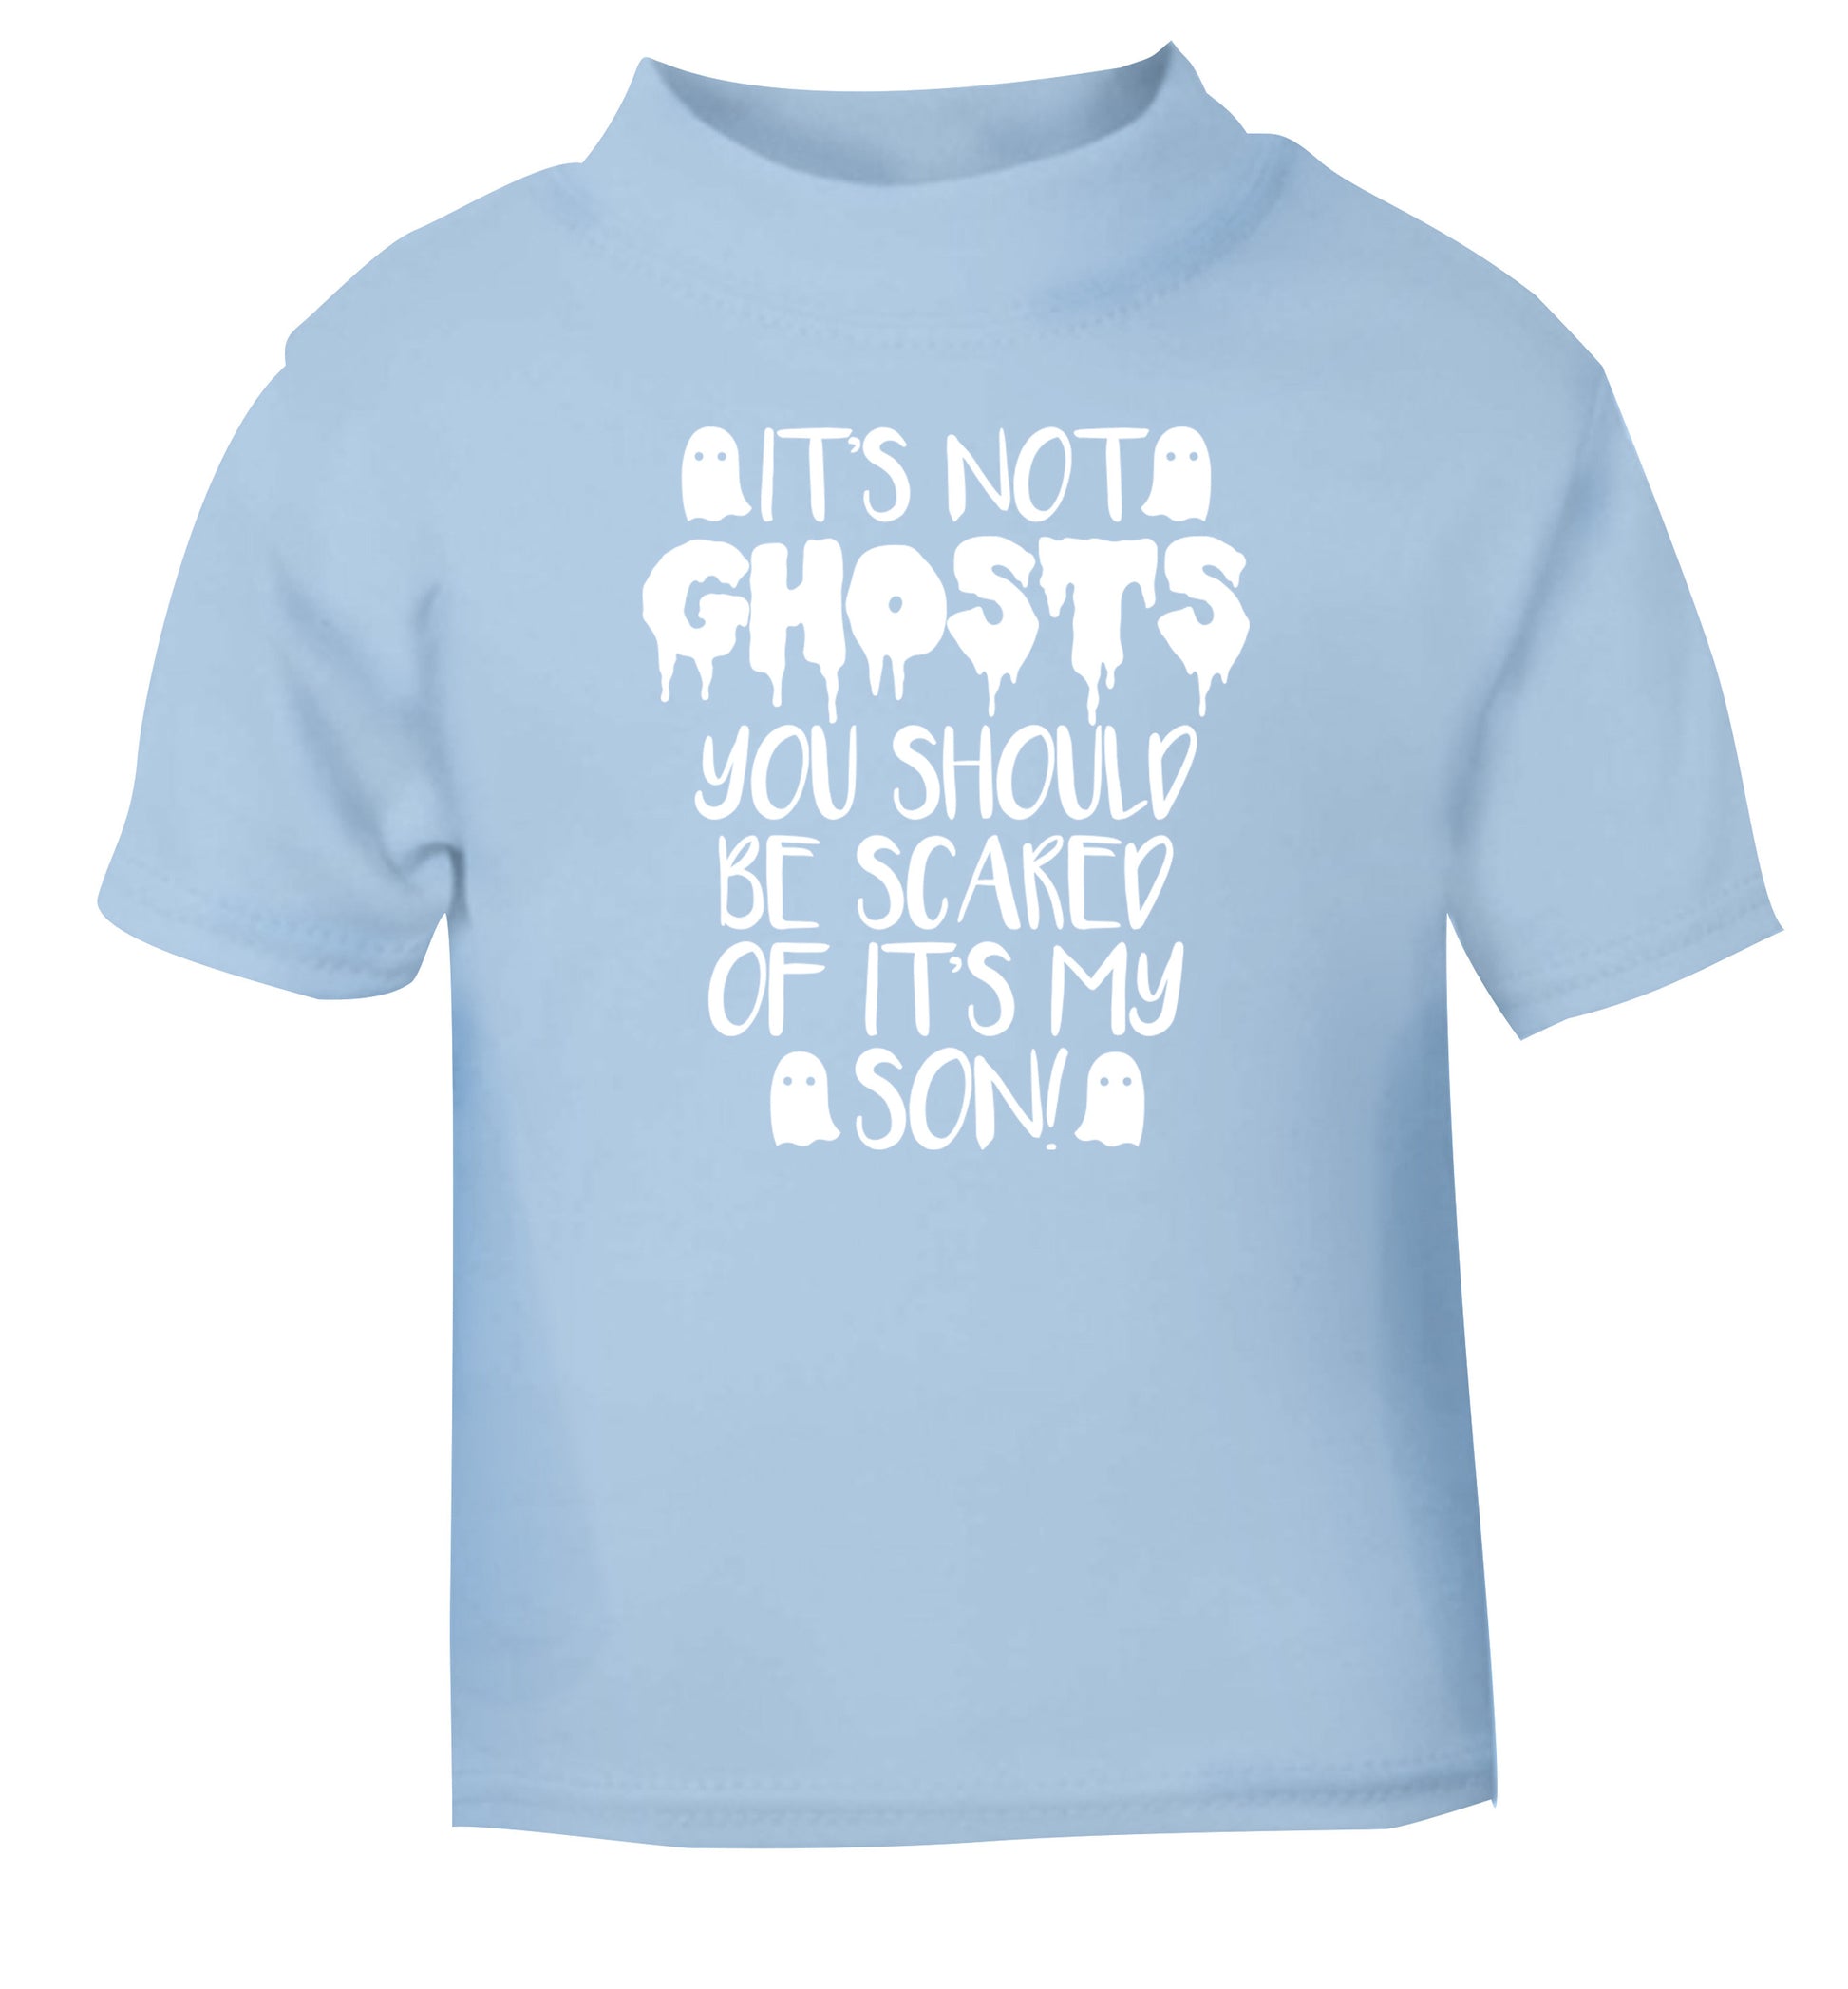 It's not ghosts you should be scared of it's my son! light blue Baby Toddler Tshirt 2 Years